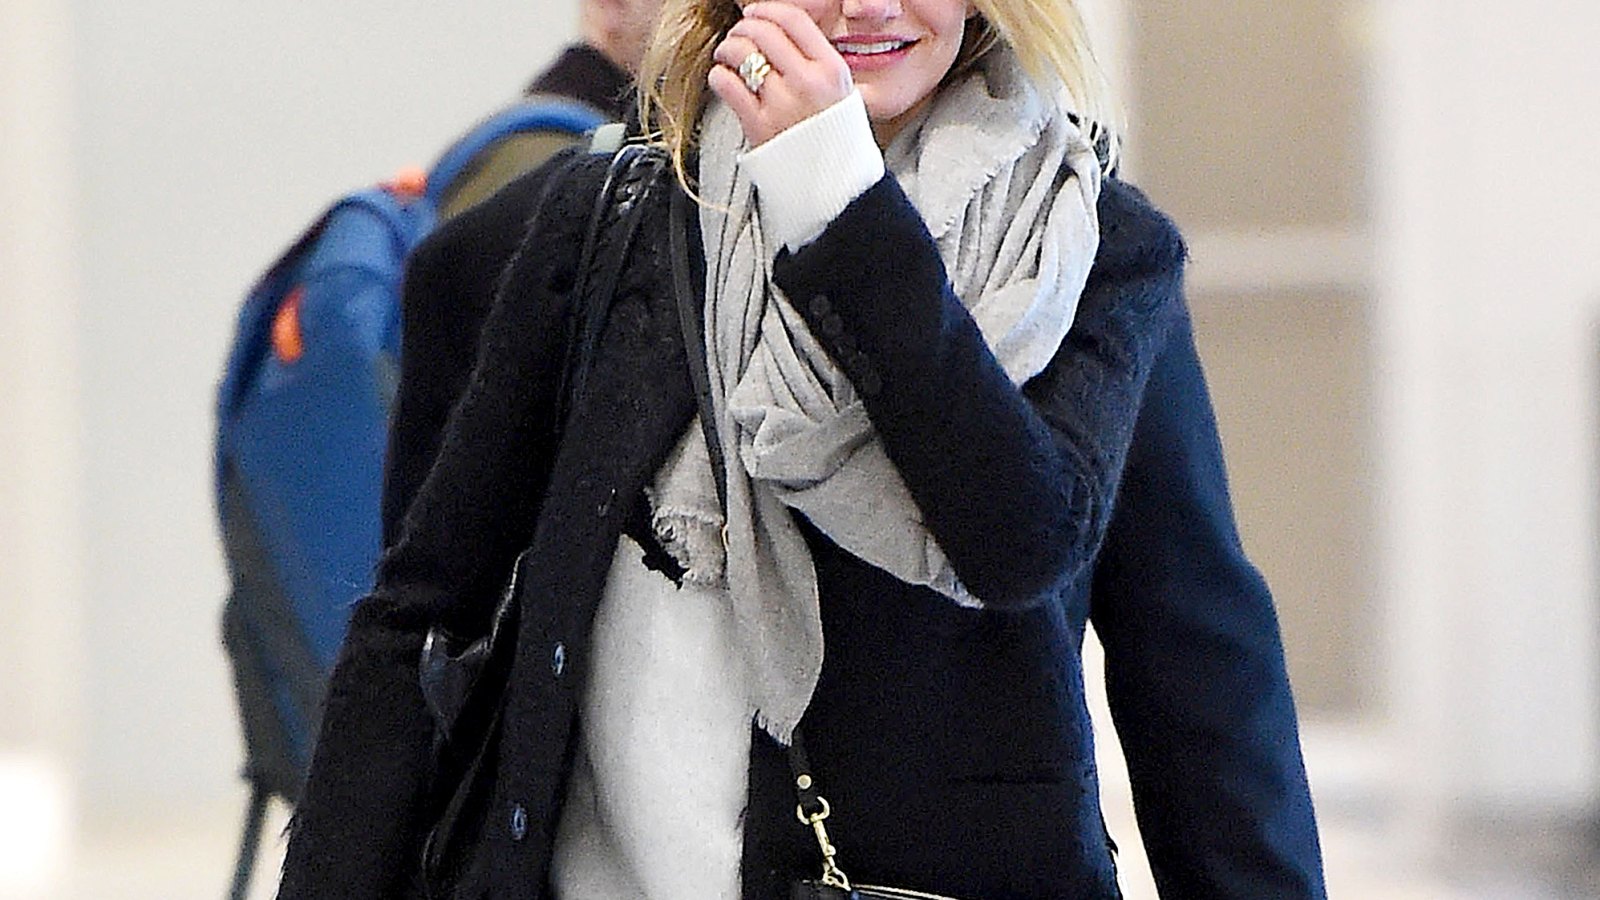 Cameron Diaz wearing a possible engagement ring